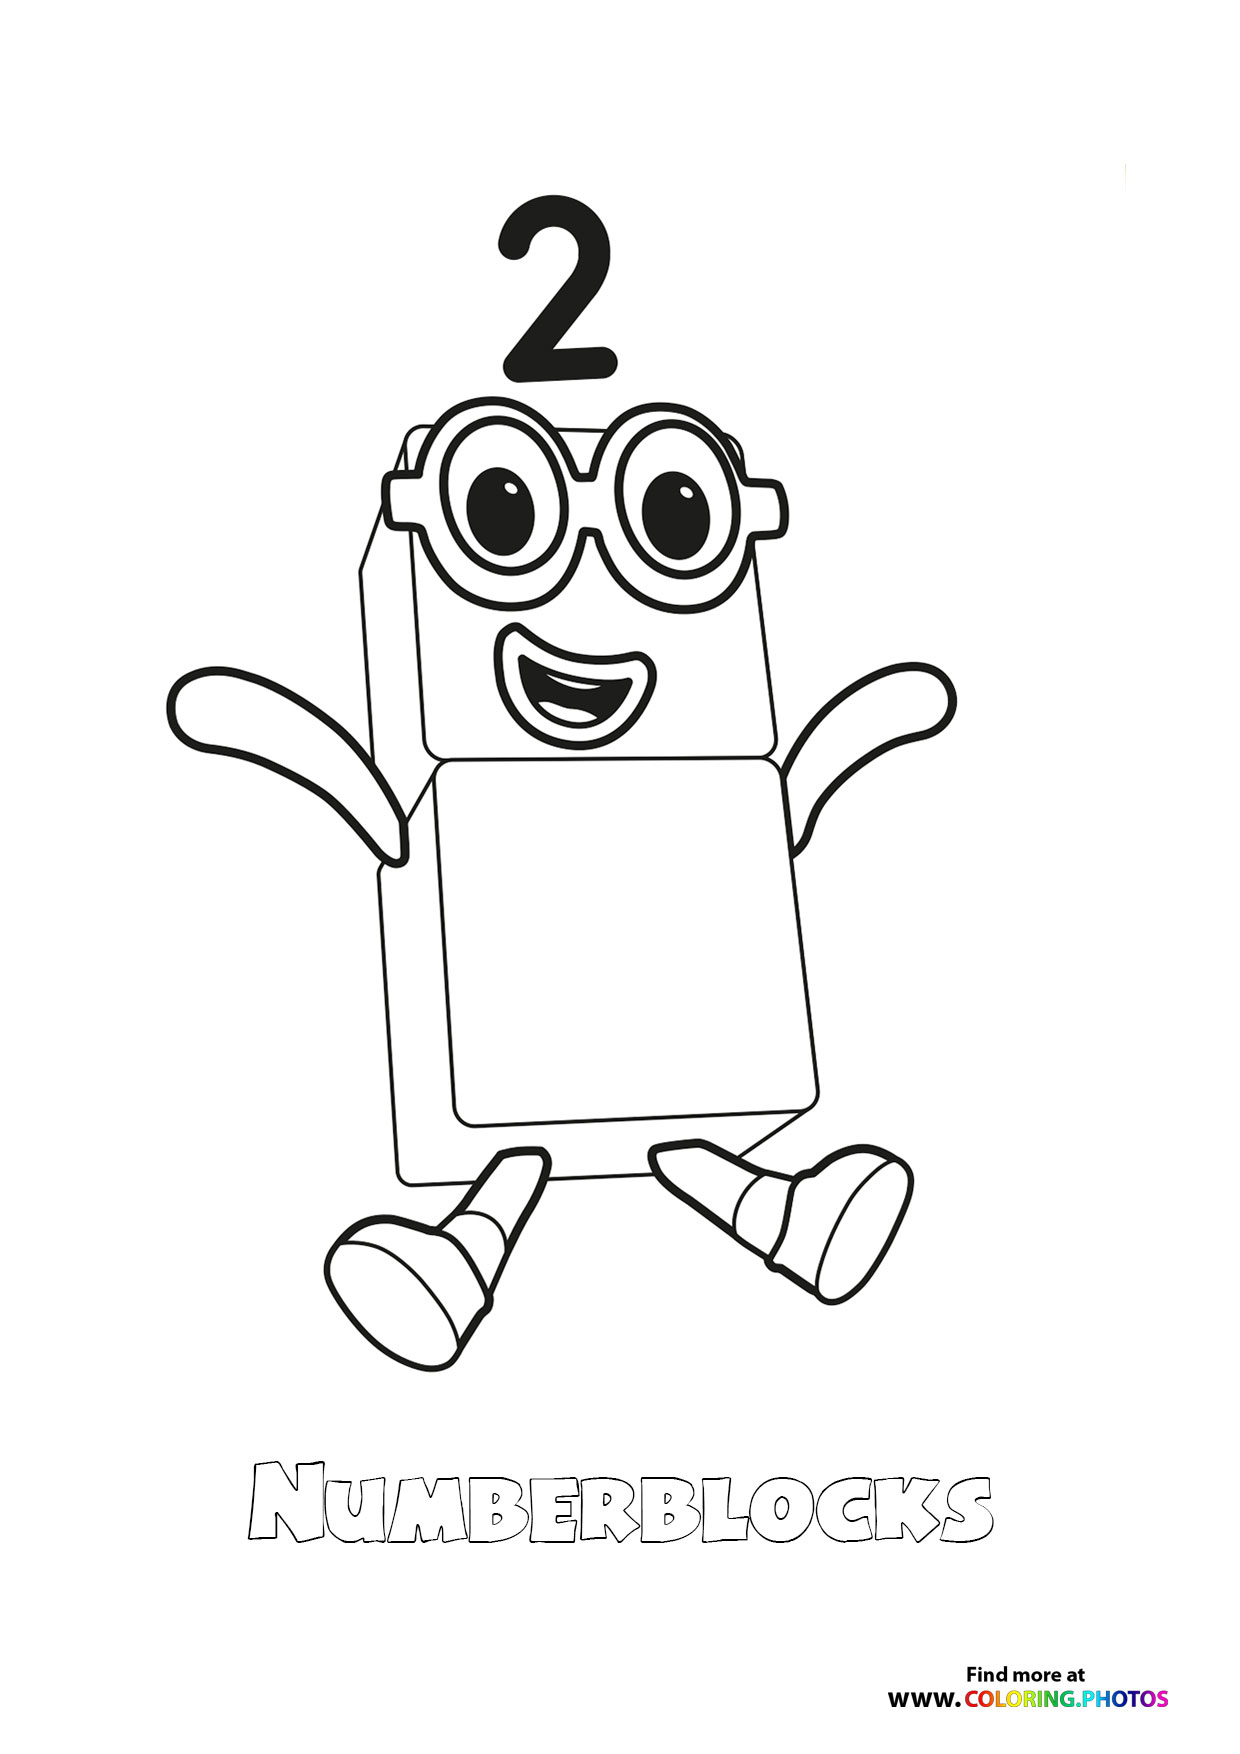 Numberblocks - Coloring Pages for kids | 100% free print or download